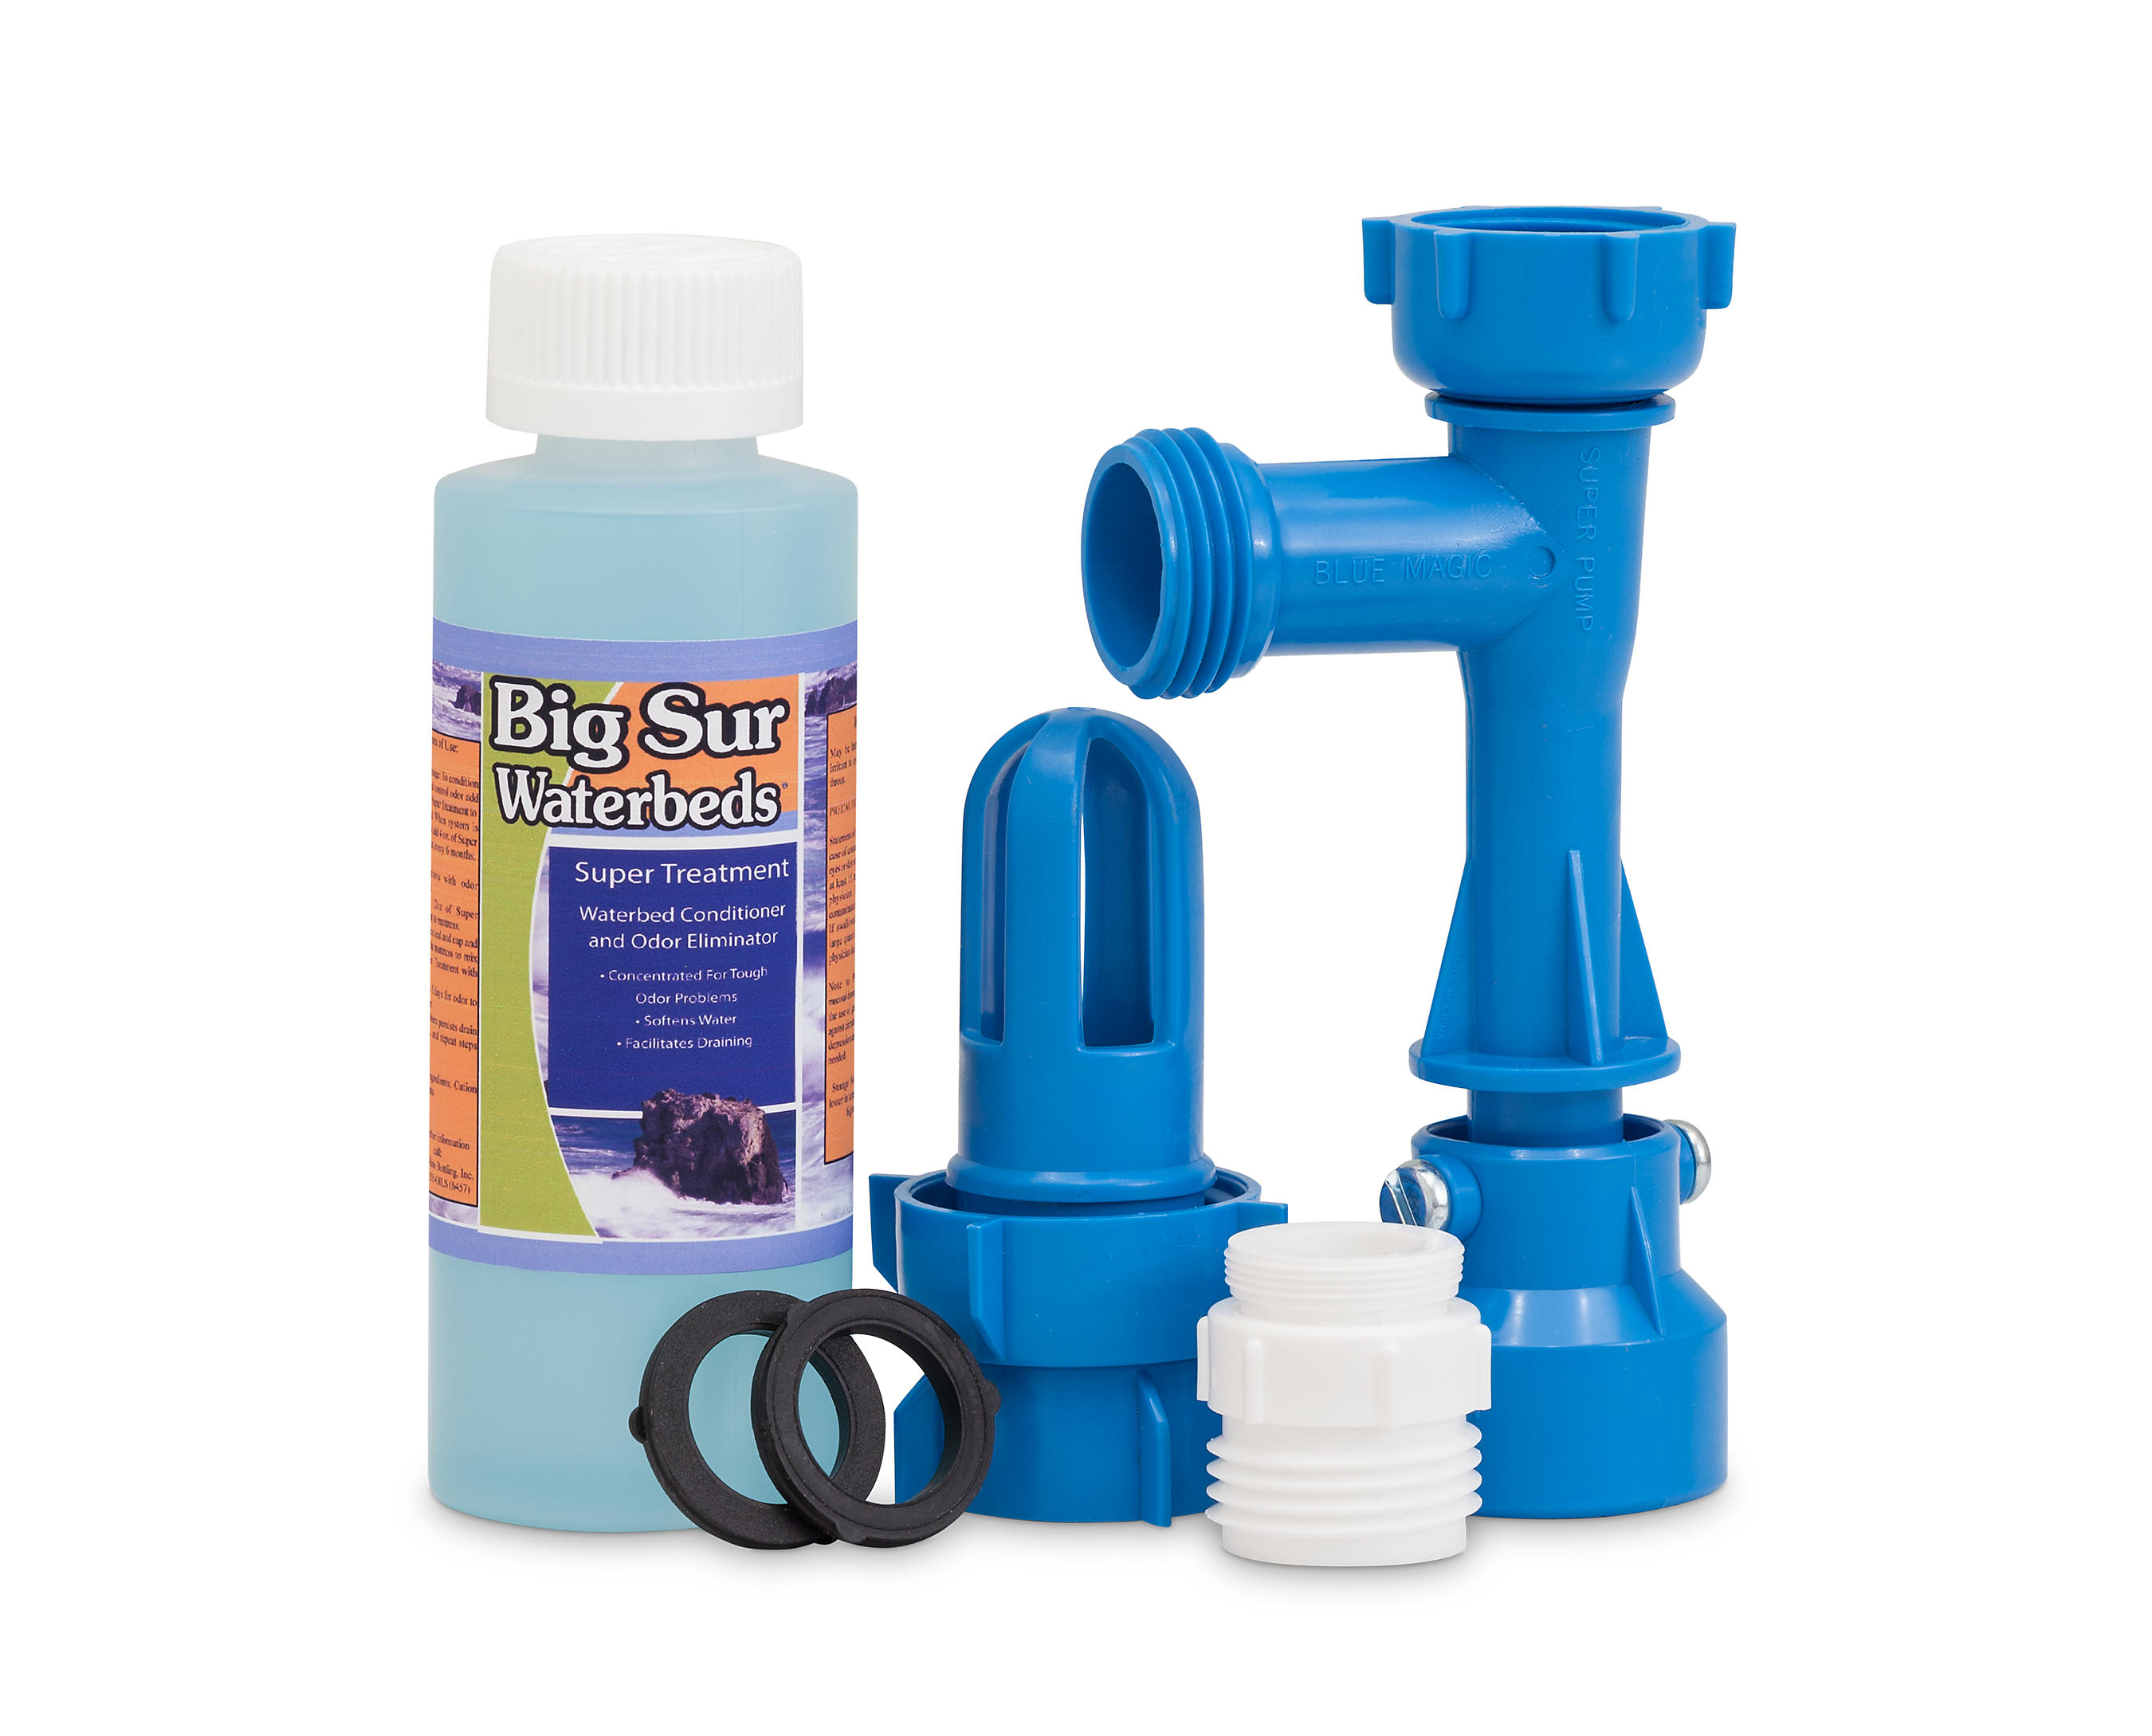 Waterbed Drain & Fill Kit and two Waterbed Treatments $54.00 